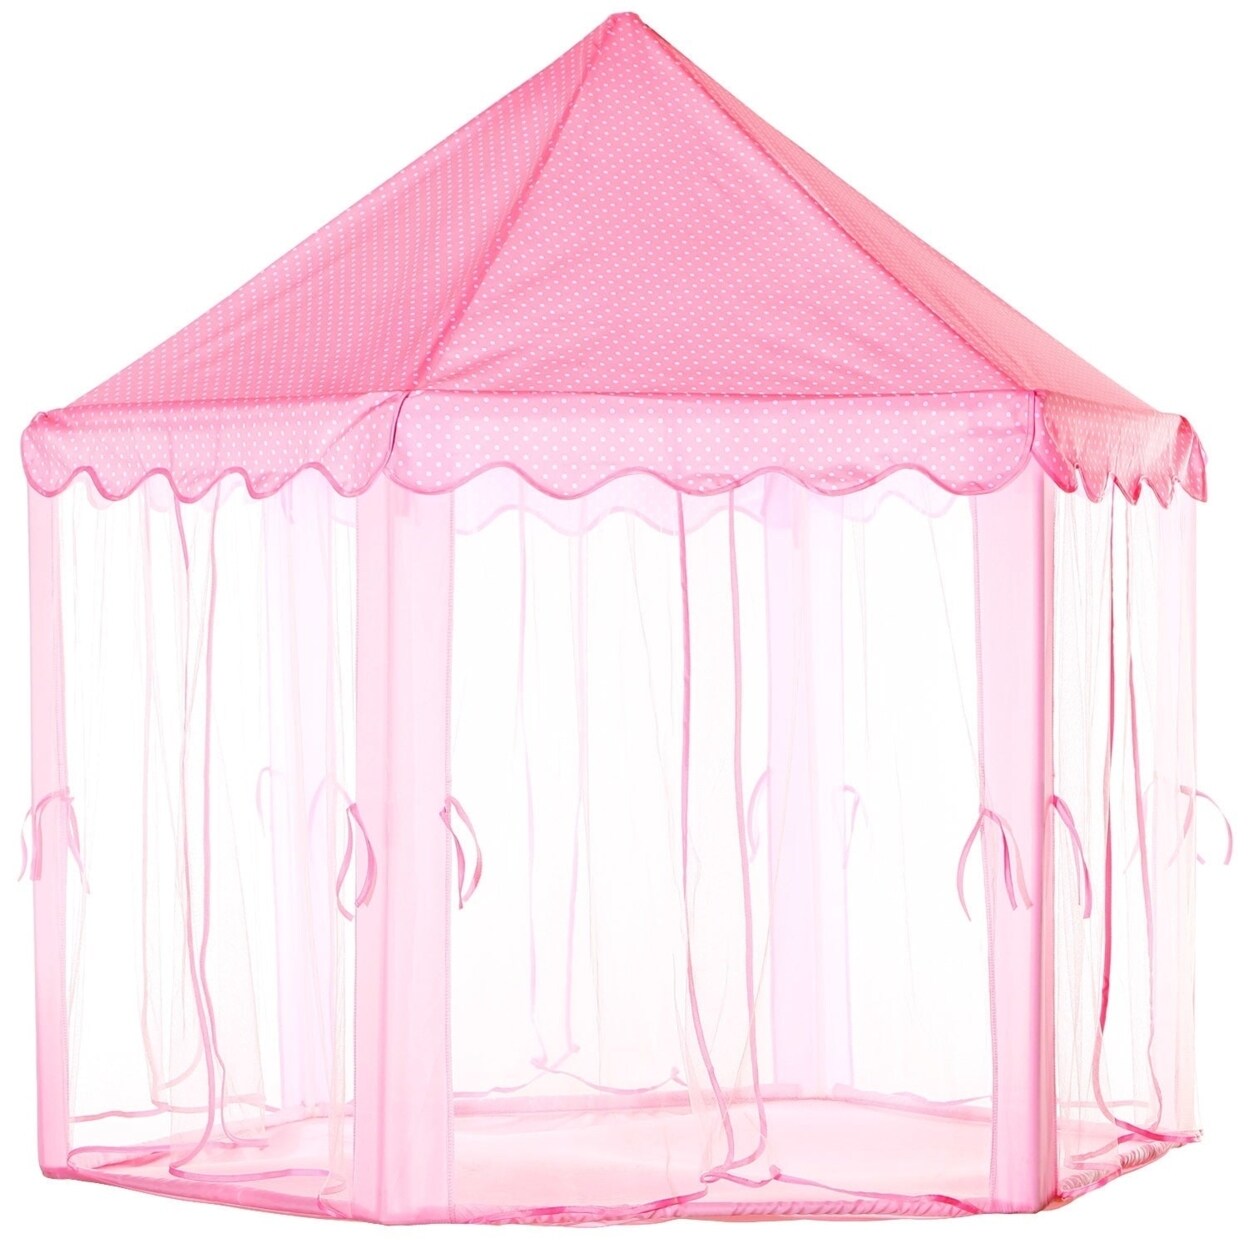 SKUSHOPS Kids Play Tents Princess for Girls Princess Castle Children Playhouse Indoor Outdoor Use